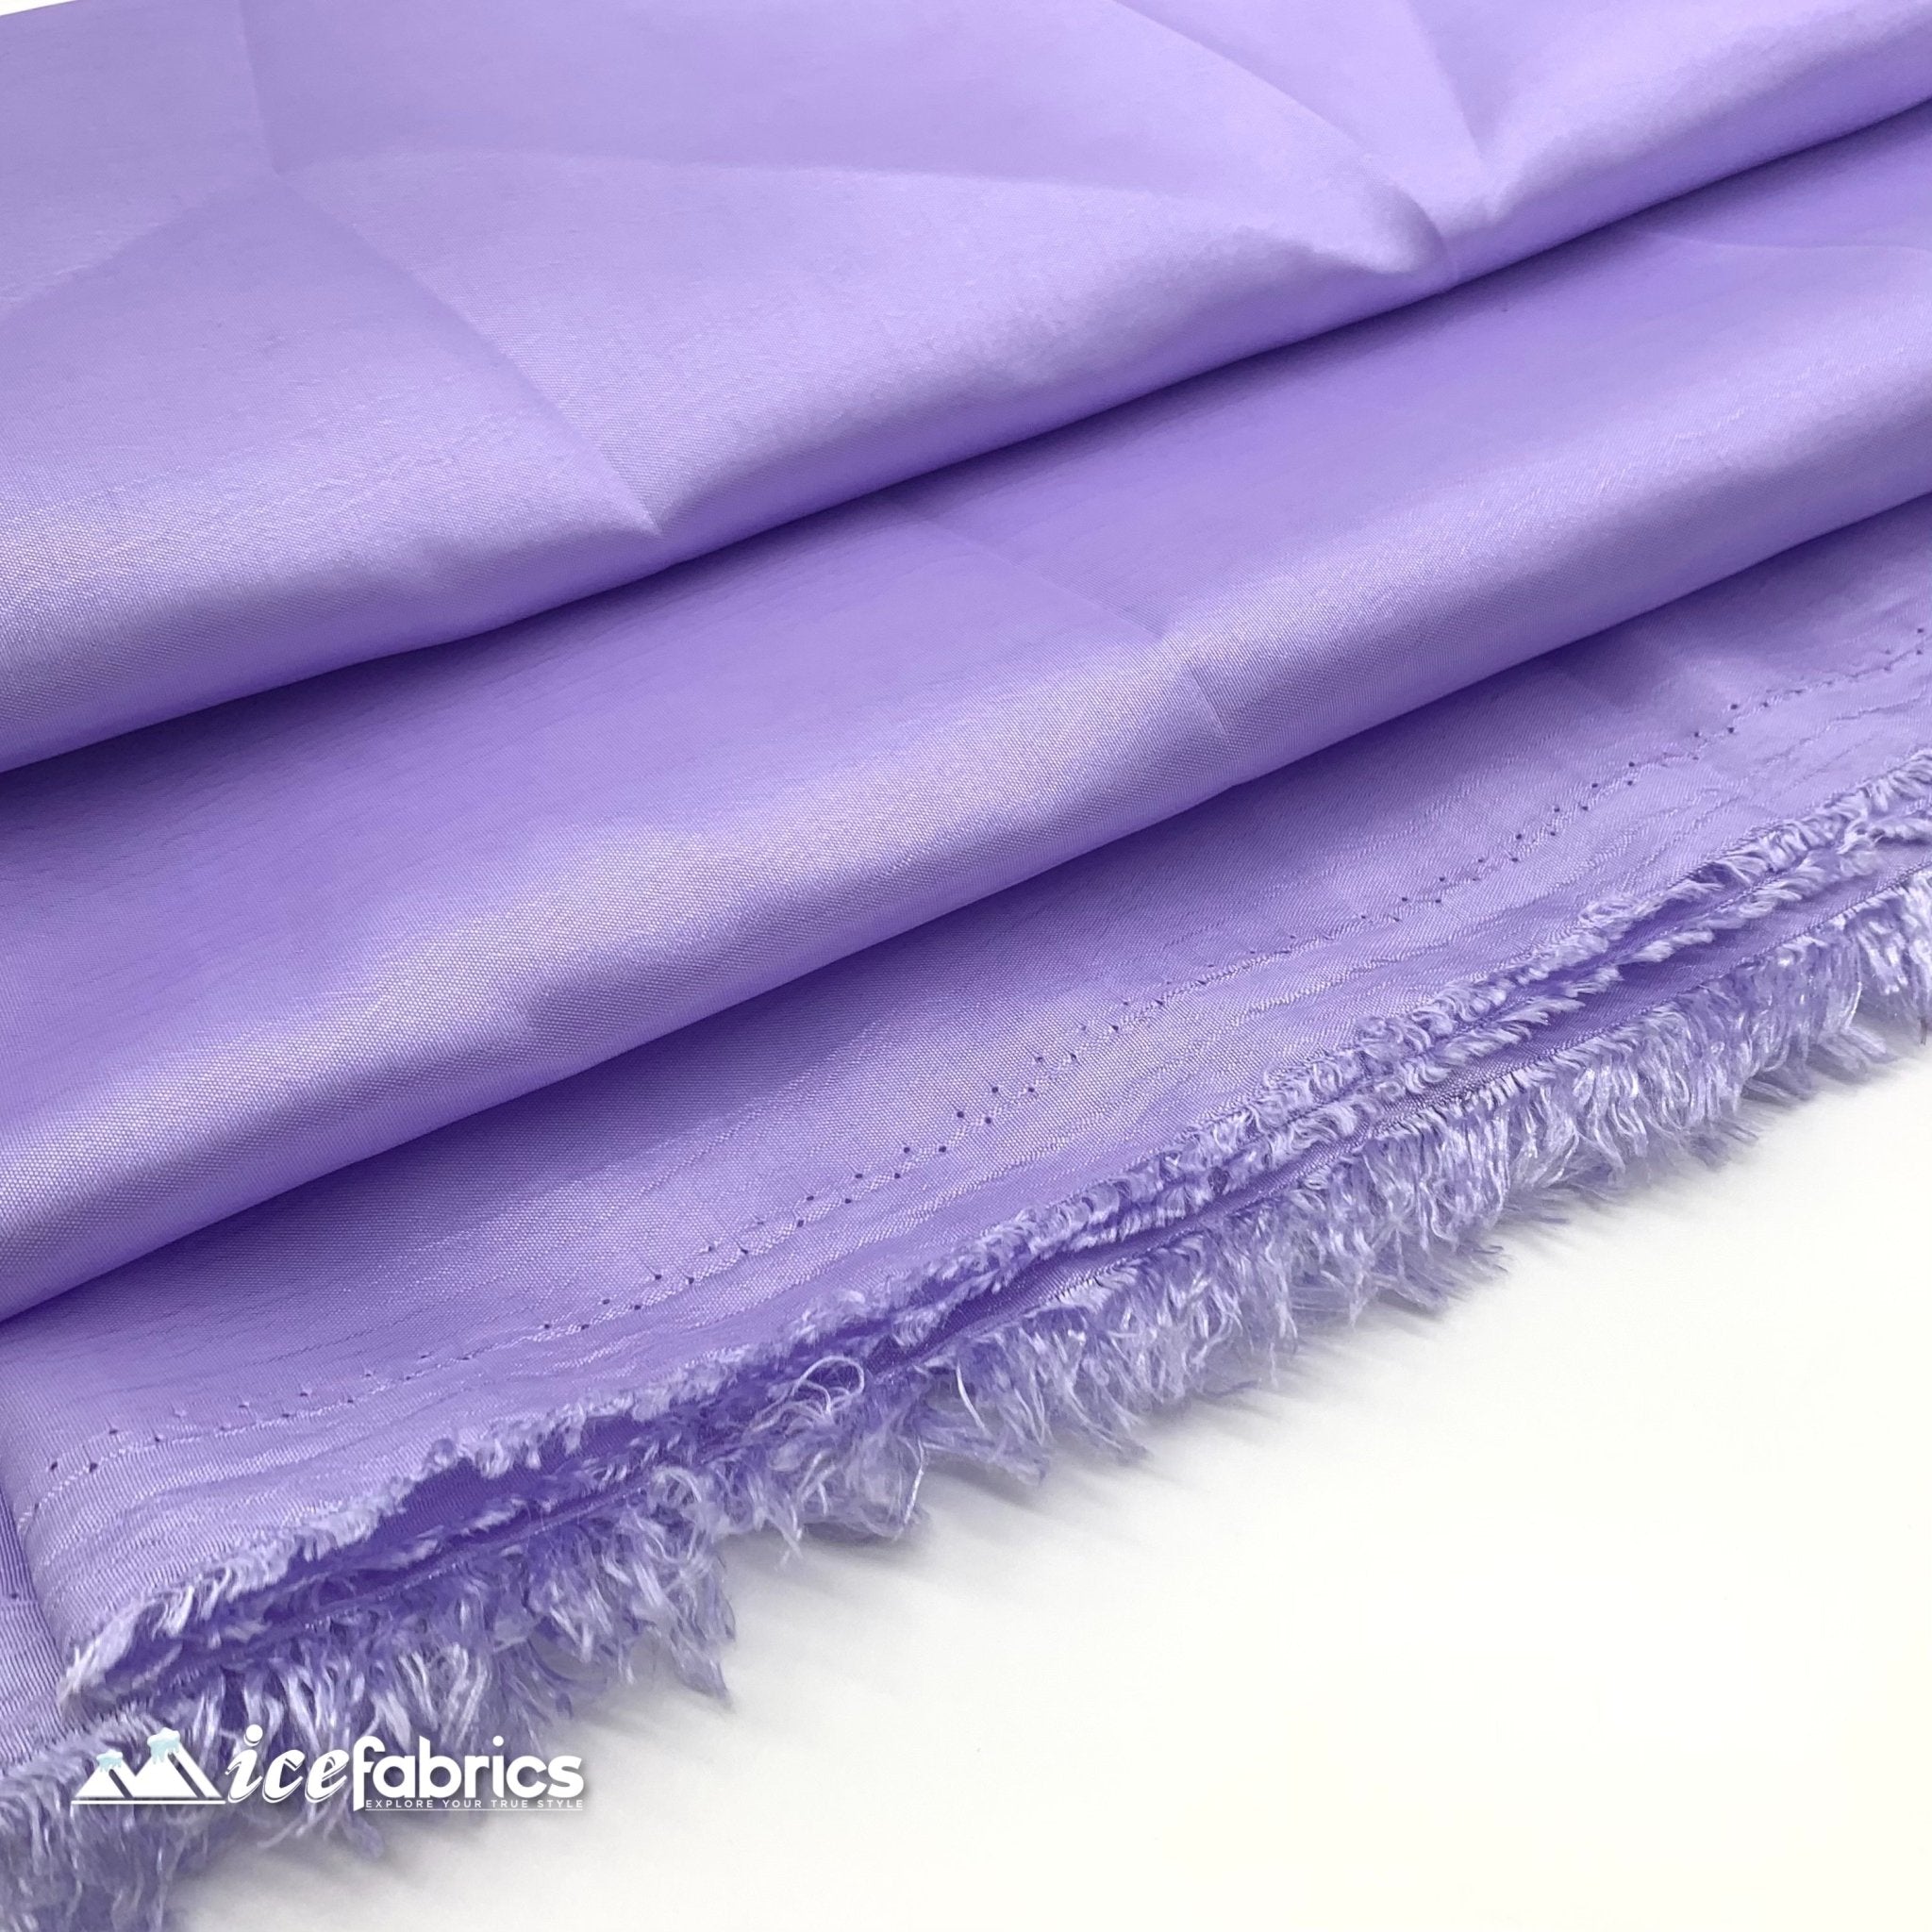 High Quality Solid Taffeta Fabric_ 60" Width_ By The YardTaffeta FabricICEFABRICICE FABRICSLavenderHigh Quality Solid Taffeta Fabric_ 60" Width_ By The YardTaffeta FabricICEFABRICICE FABRICSLavenderHigh Quality Solid Taffeta Fabric_ 60" Width_ By The Yard ICEFABRIC Lavender